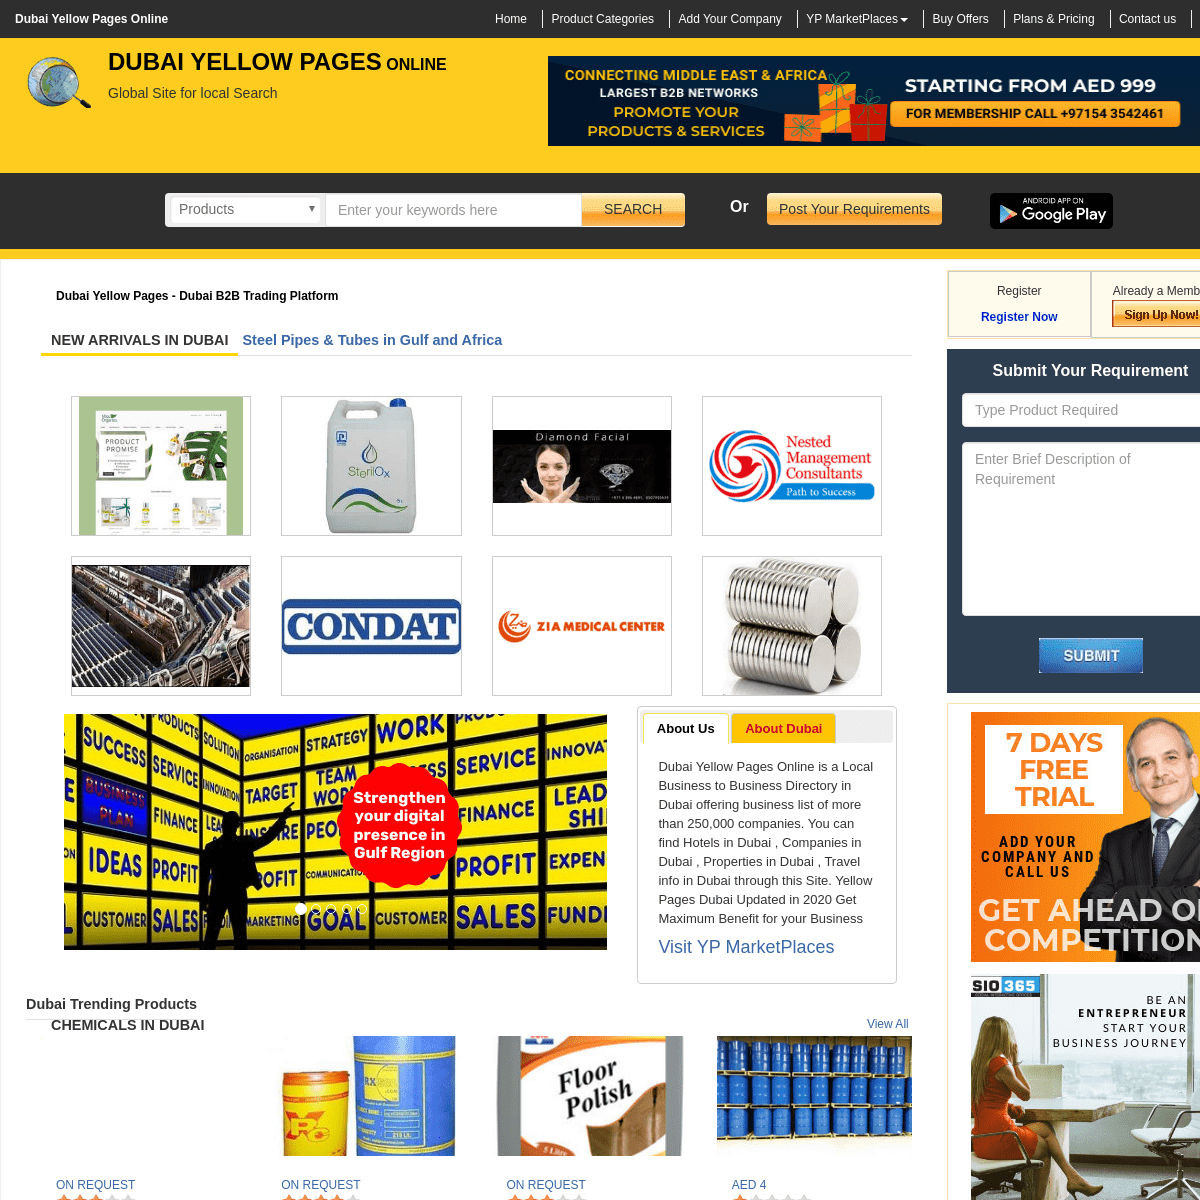 A complete backup of dubaiyellowpagesonline.com